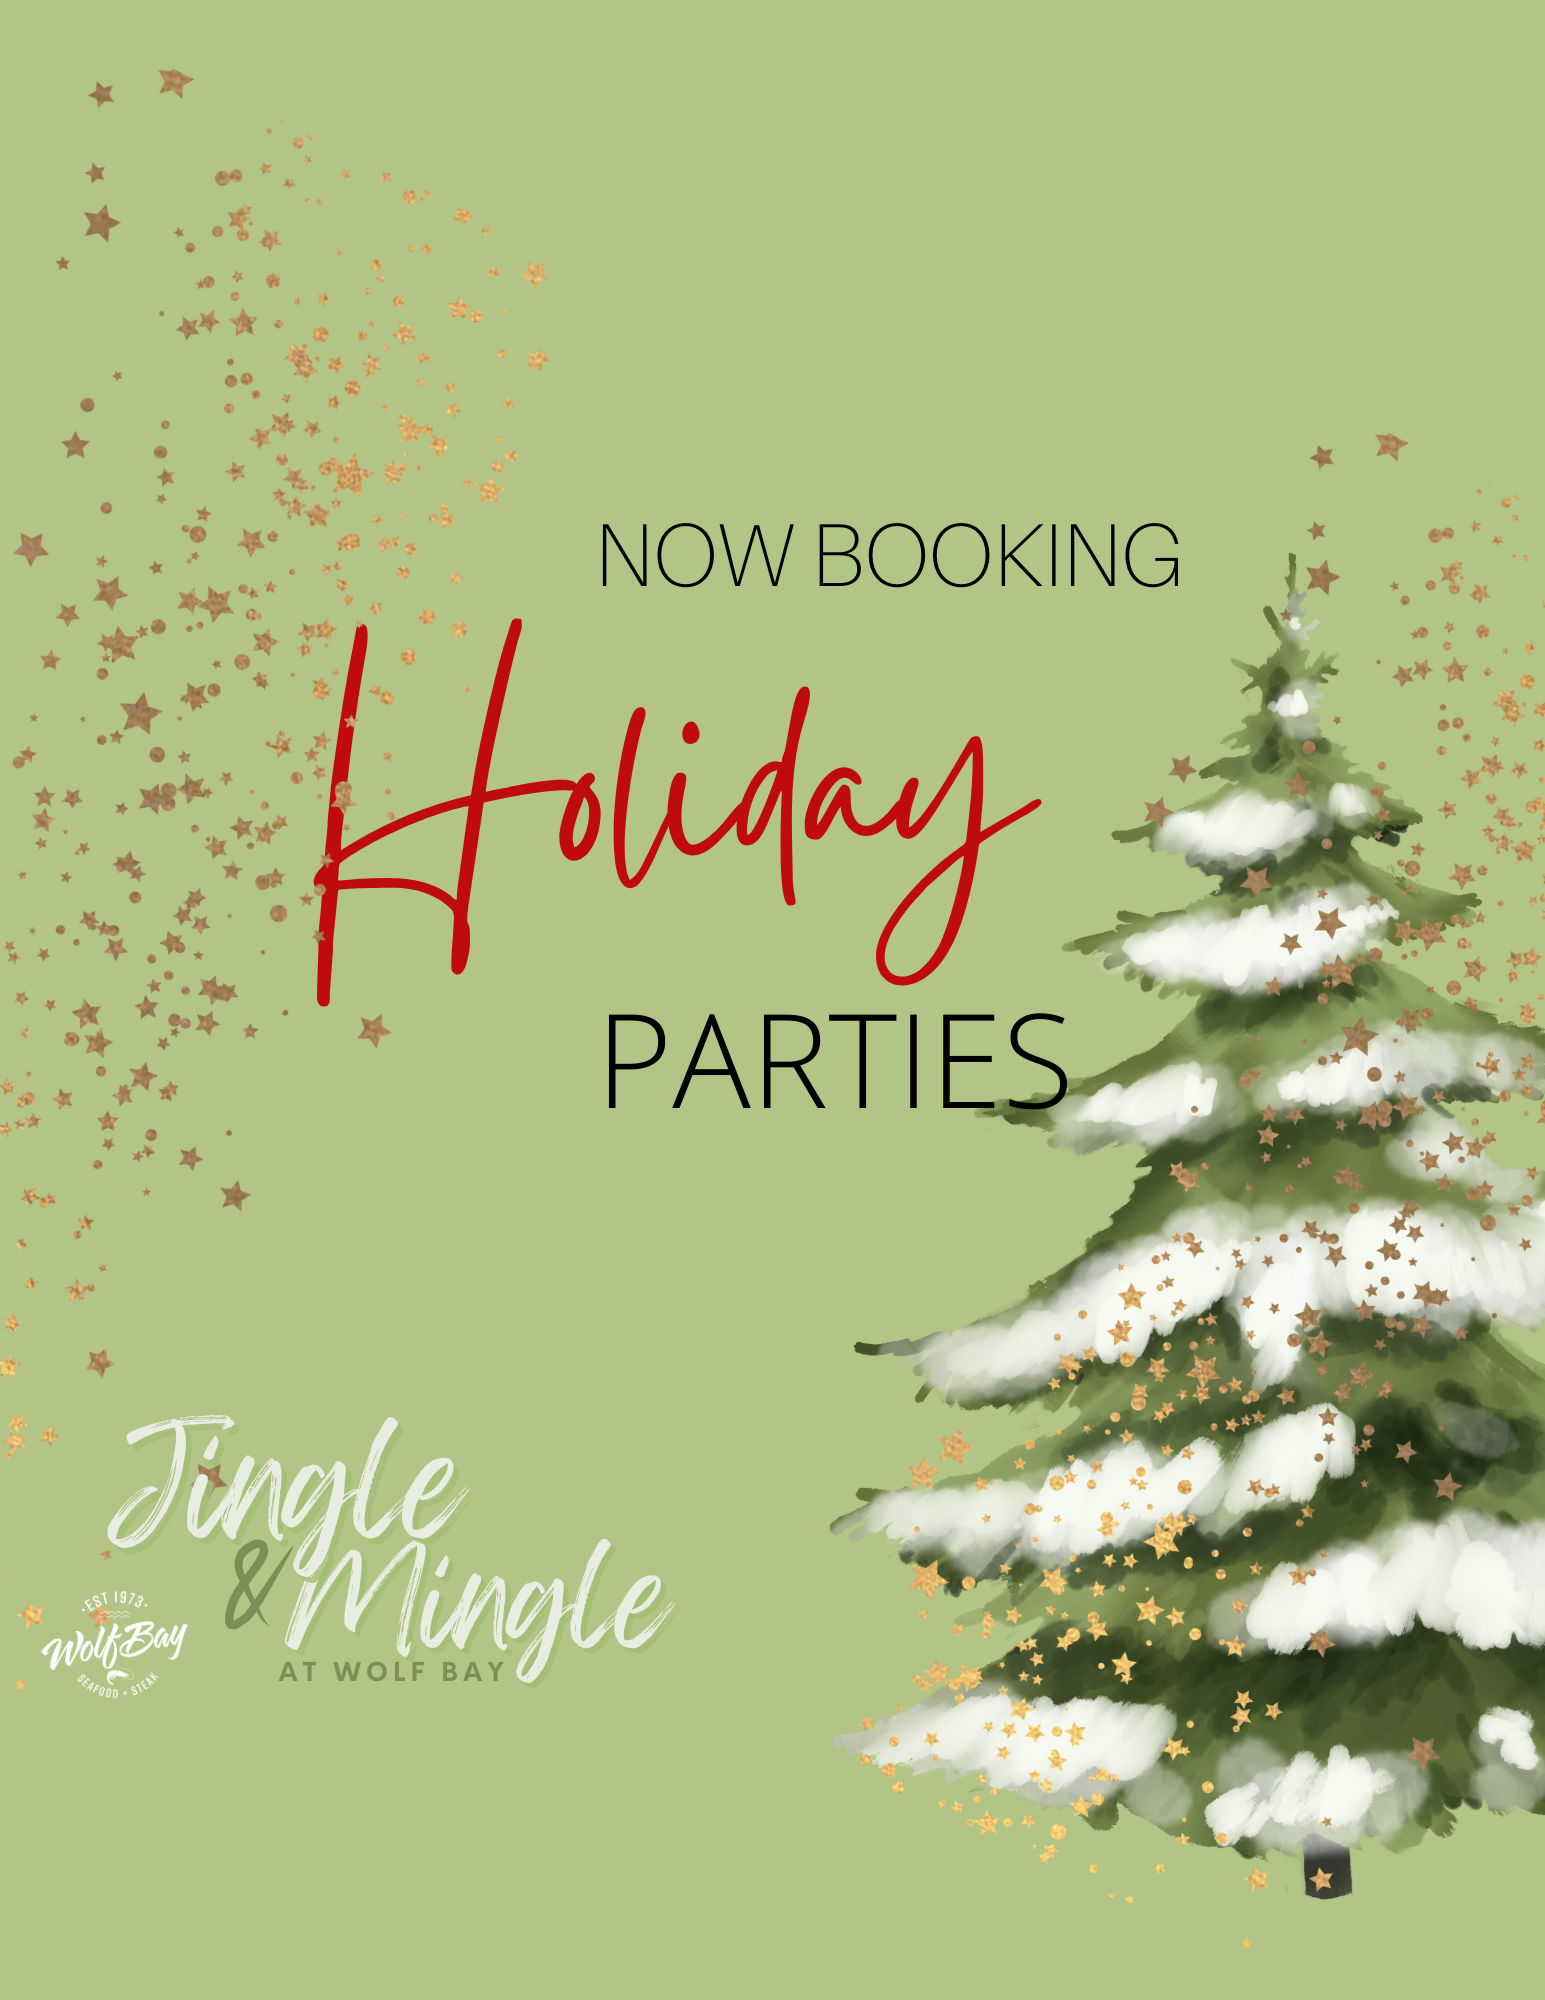 Now booking holiday parties